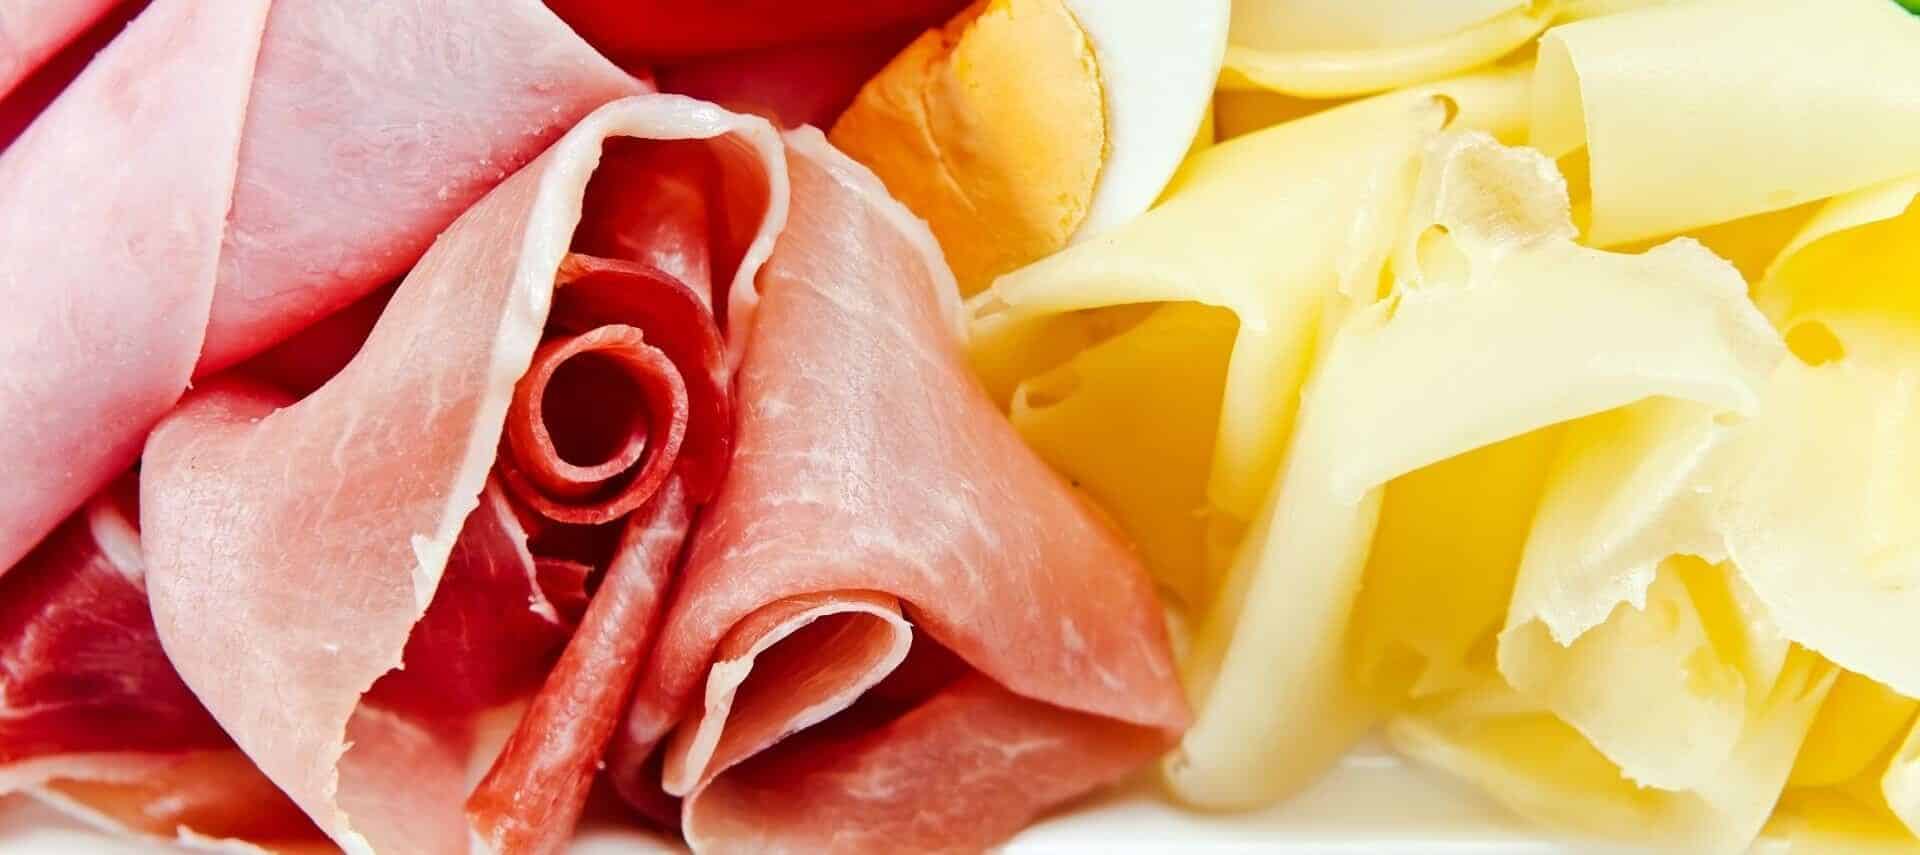 Slices of ham and cheese.